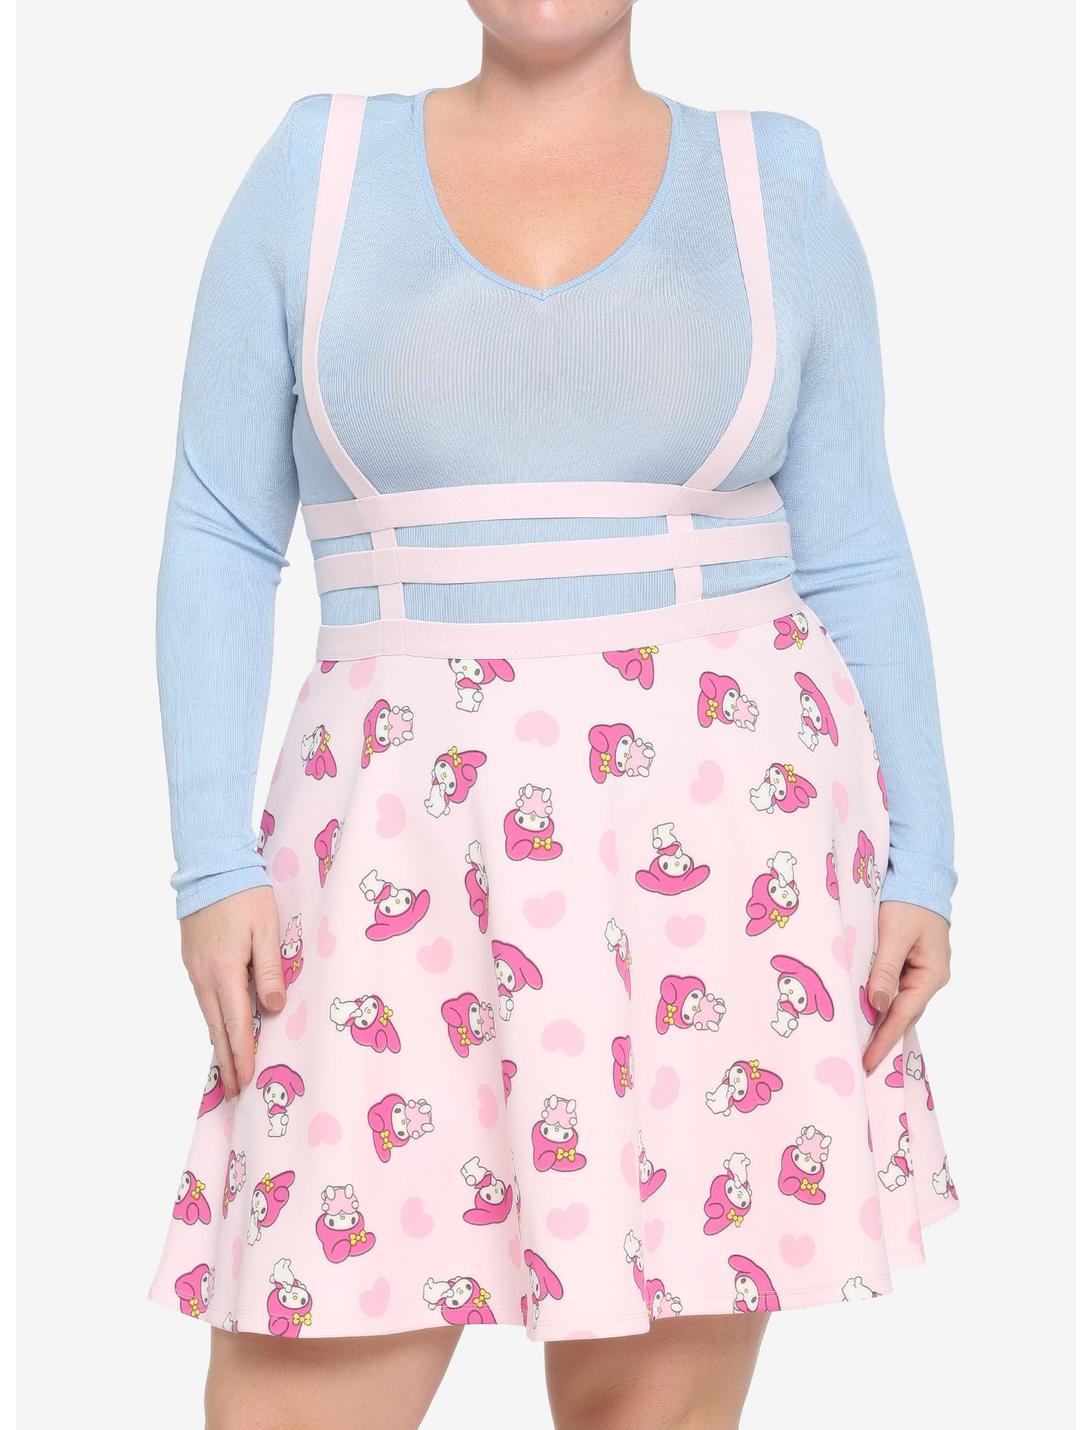 My Melody Strappy Suspender Skirt Plus Size, PINK, hi-res